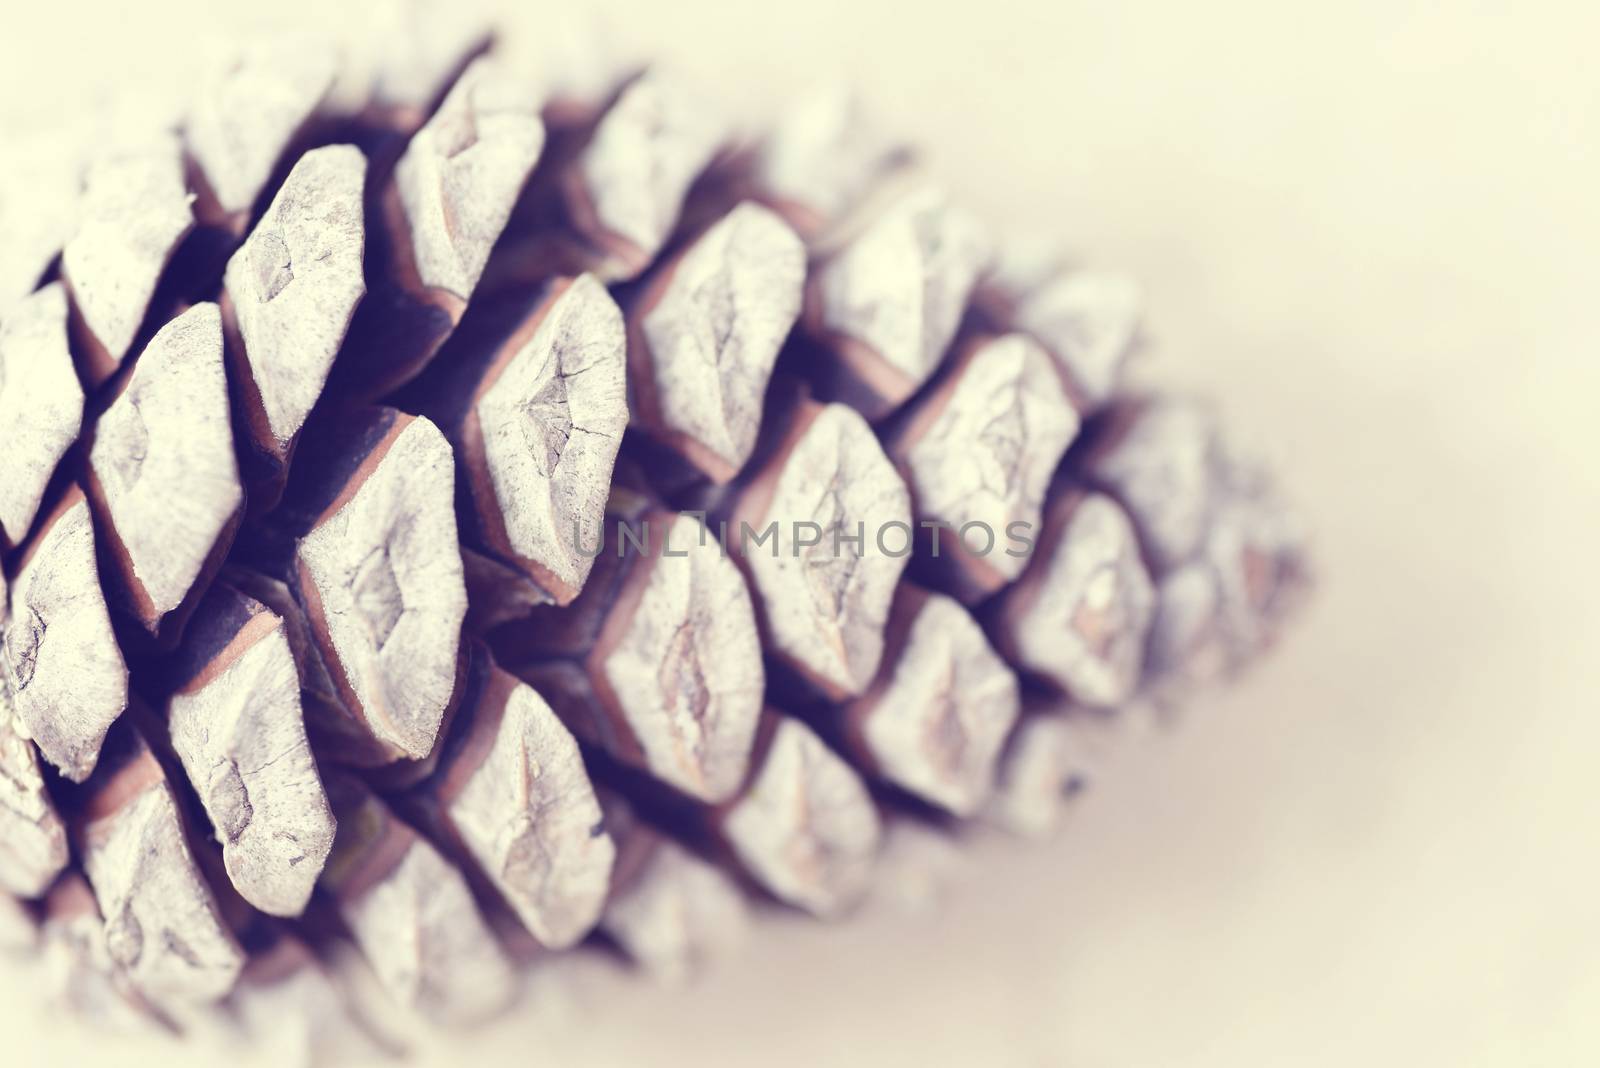 Pine cone macro shot in vintage style. Blurred background for winter or christmas season.